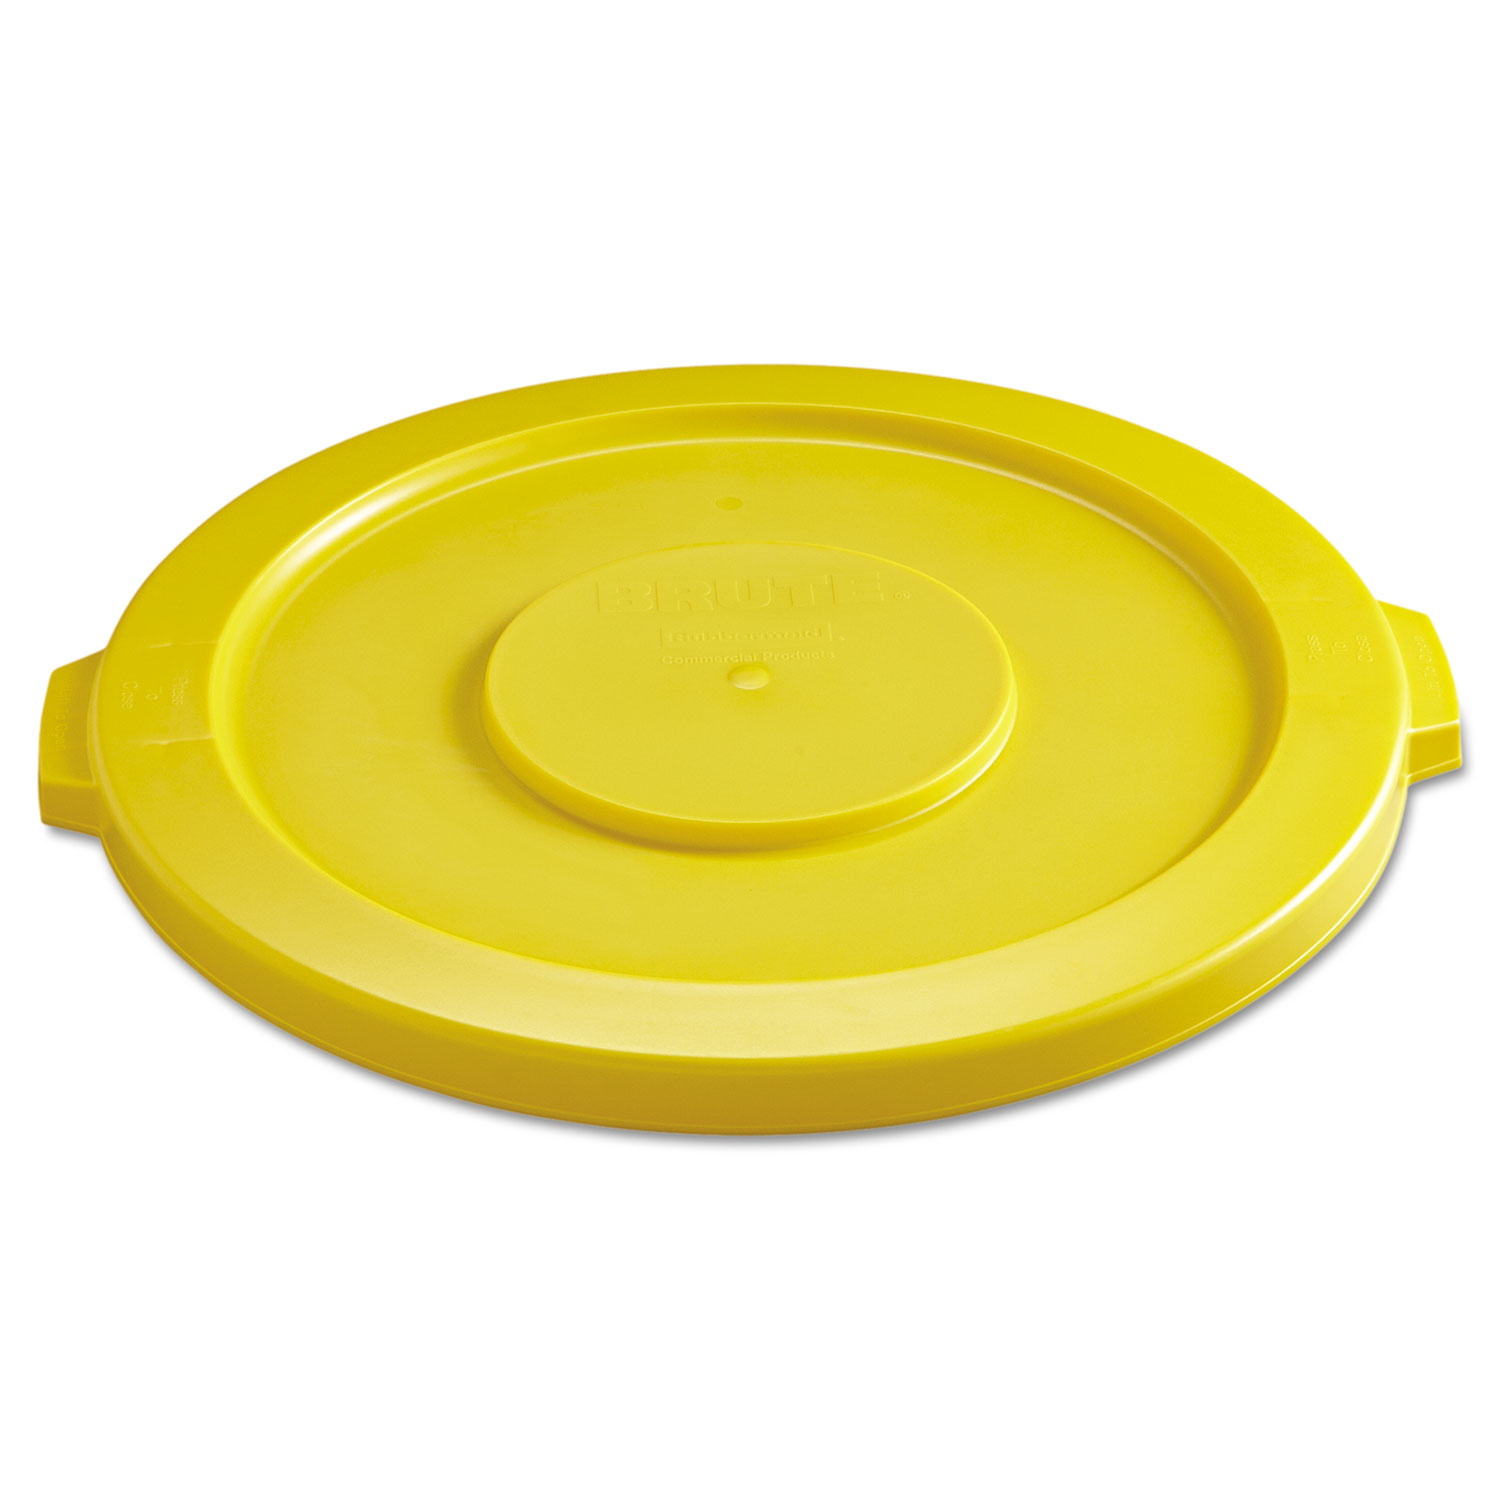 Round Flat Top Lid, for 32 gal Round BRUTE Containers, 22.25" diameter, Yellow